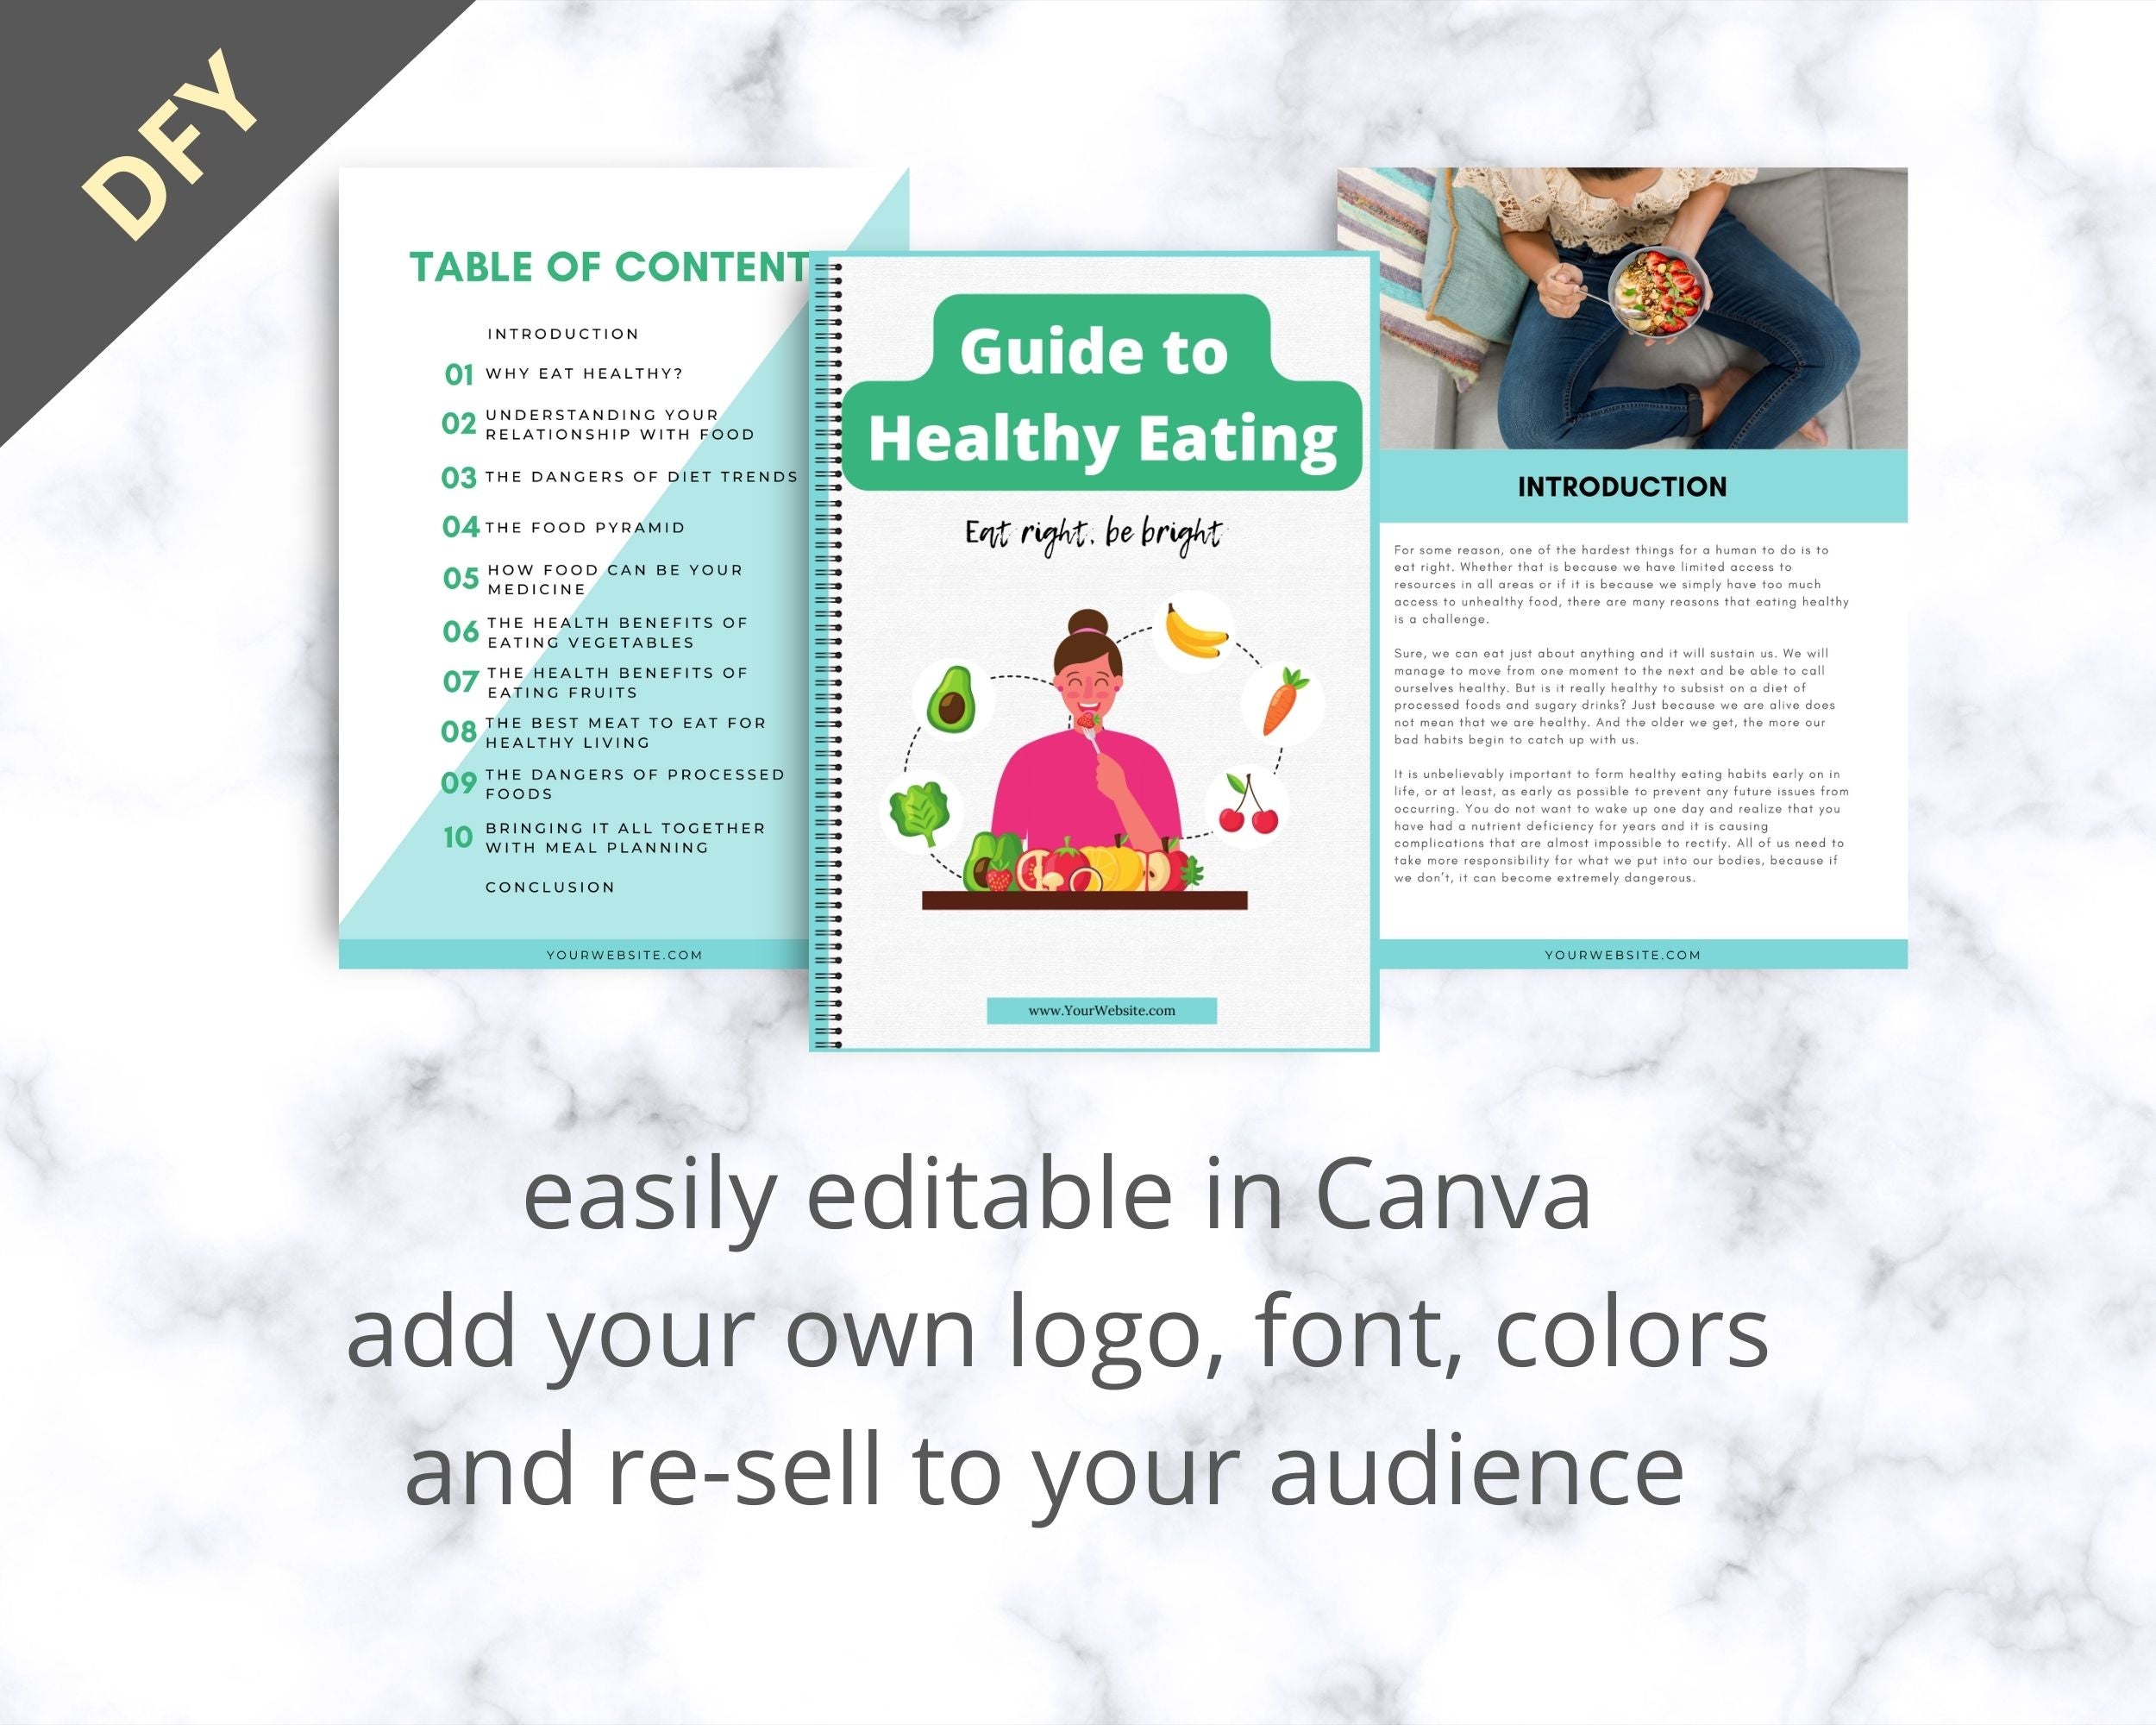 Editable Guide to Healthy Eating Ebook | Done-for-You Ebook in Canva | Rebrandable and Resizable Canva Template